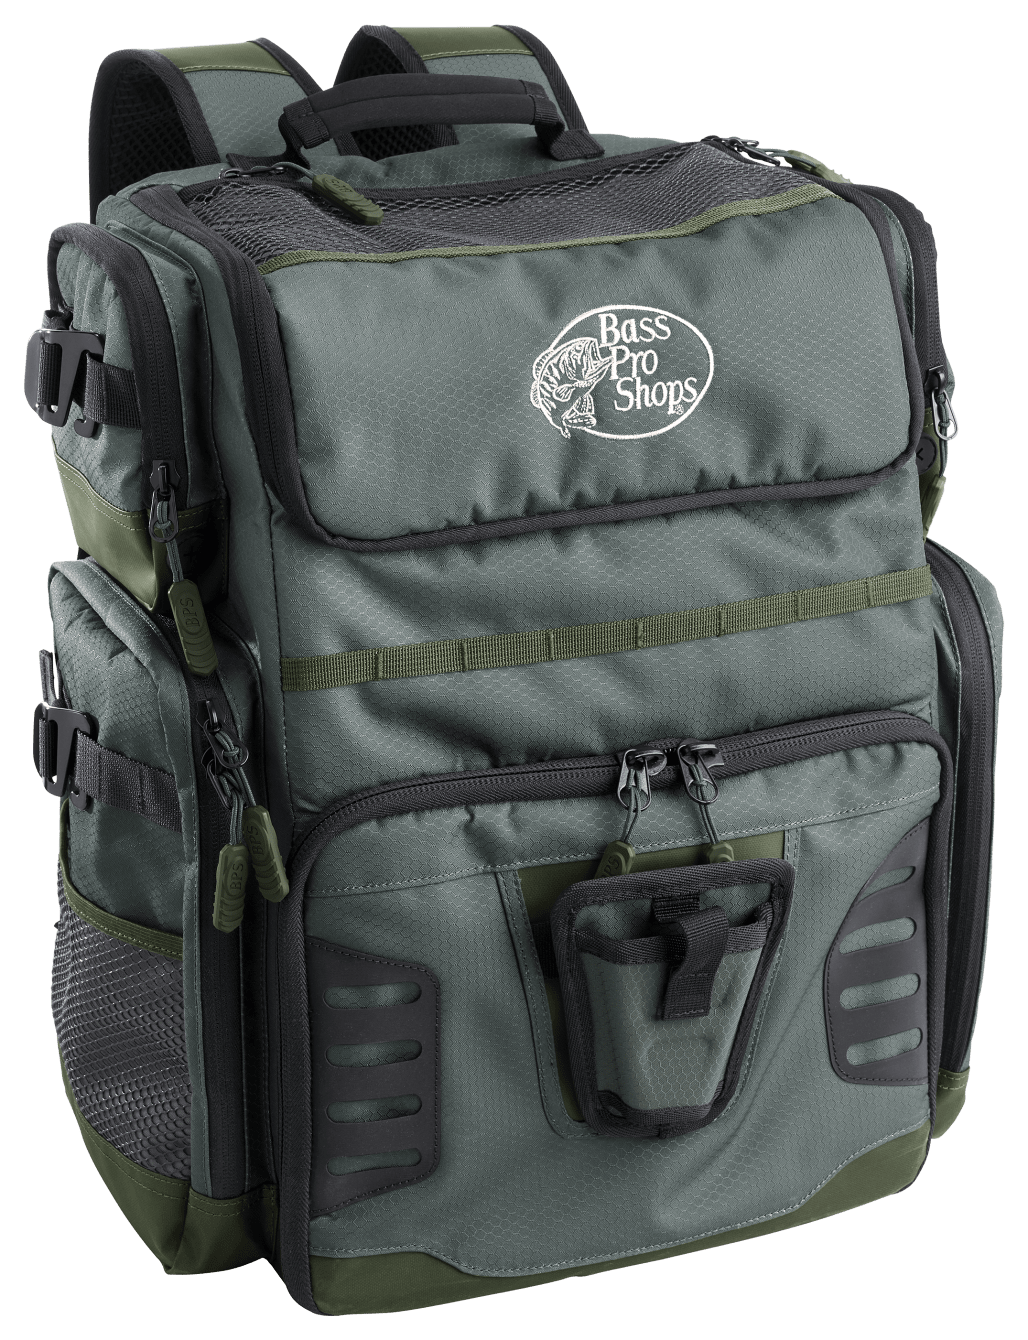 Bass Pro Shops Advanced Angler Pro Backpack Tackle System-Green - fishing gifts for dad